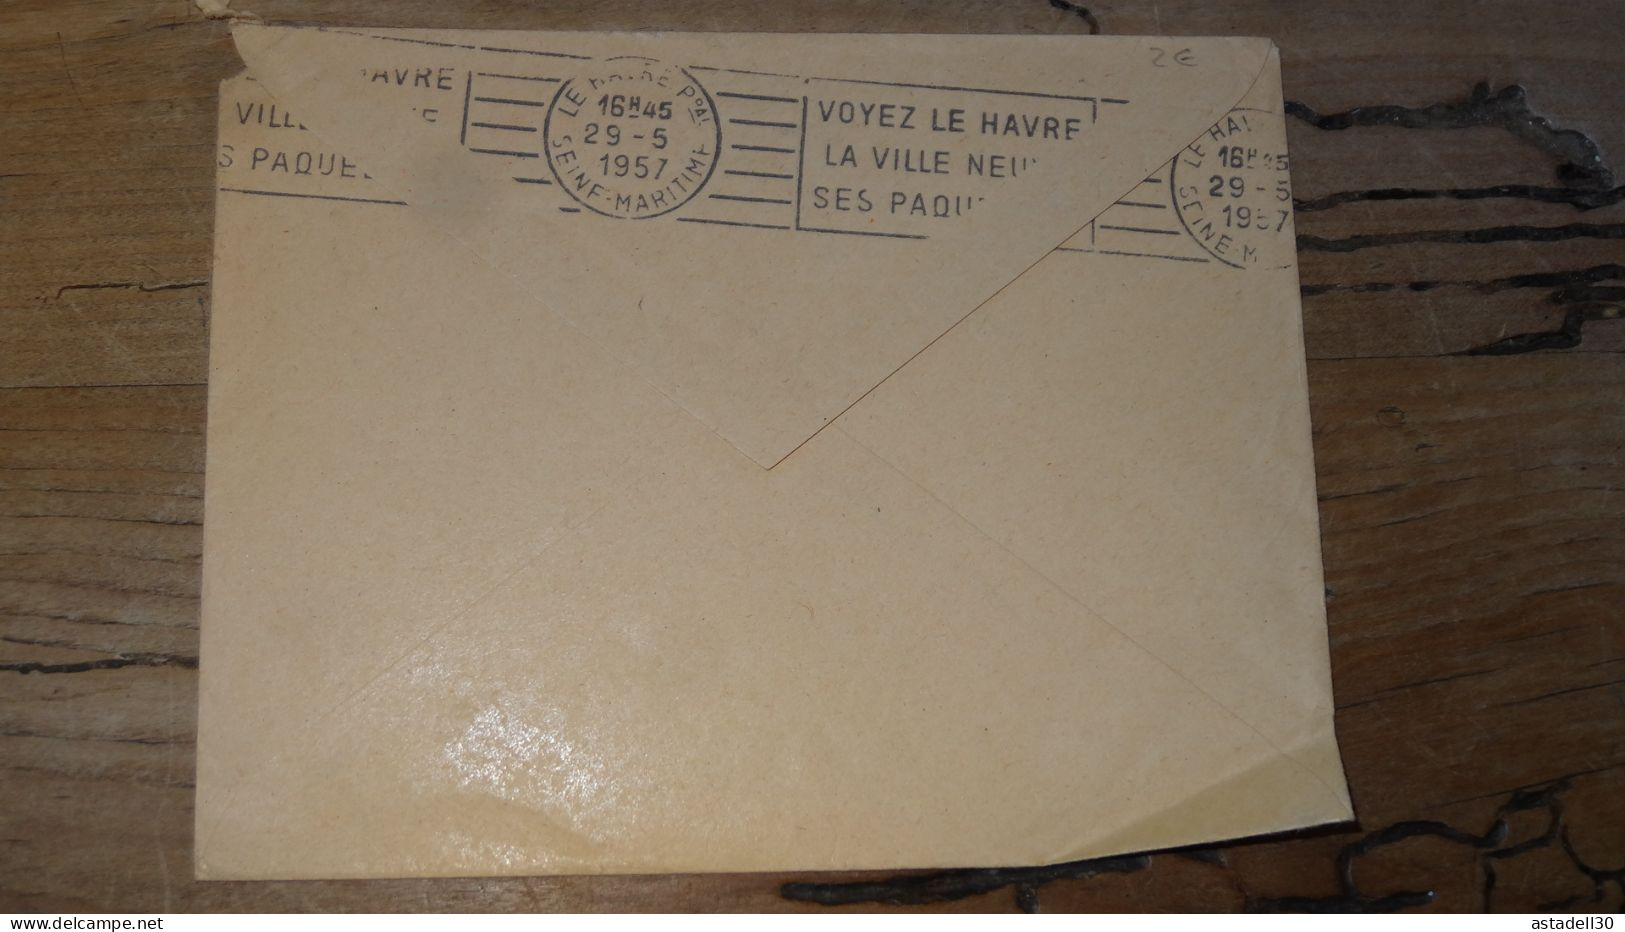 Enveloppe SUISSE, Bern 1957 ............ Boite1 .............. 240424-268 - Automatic Stamps